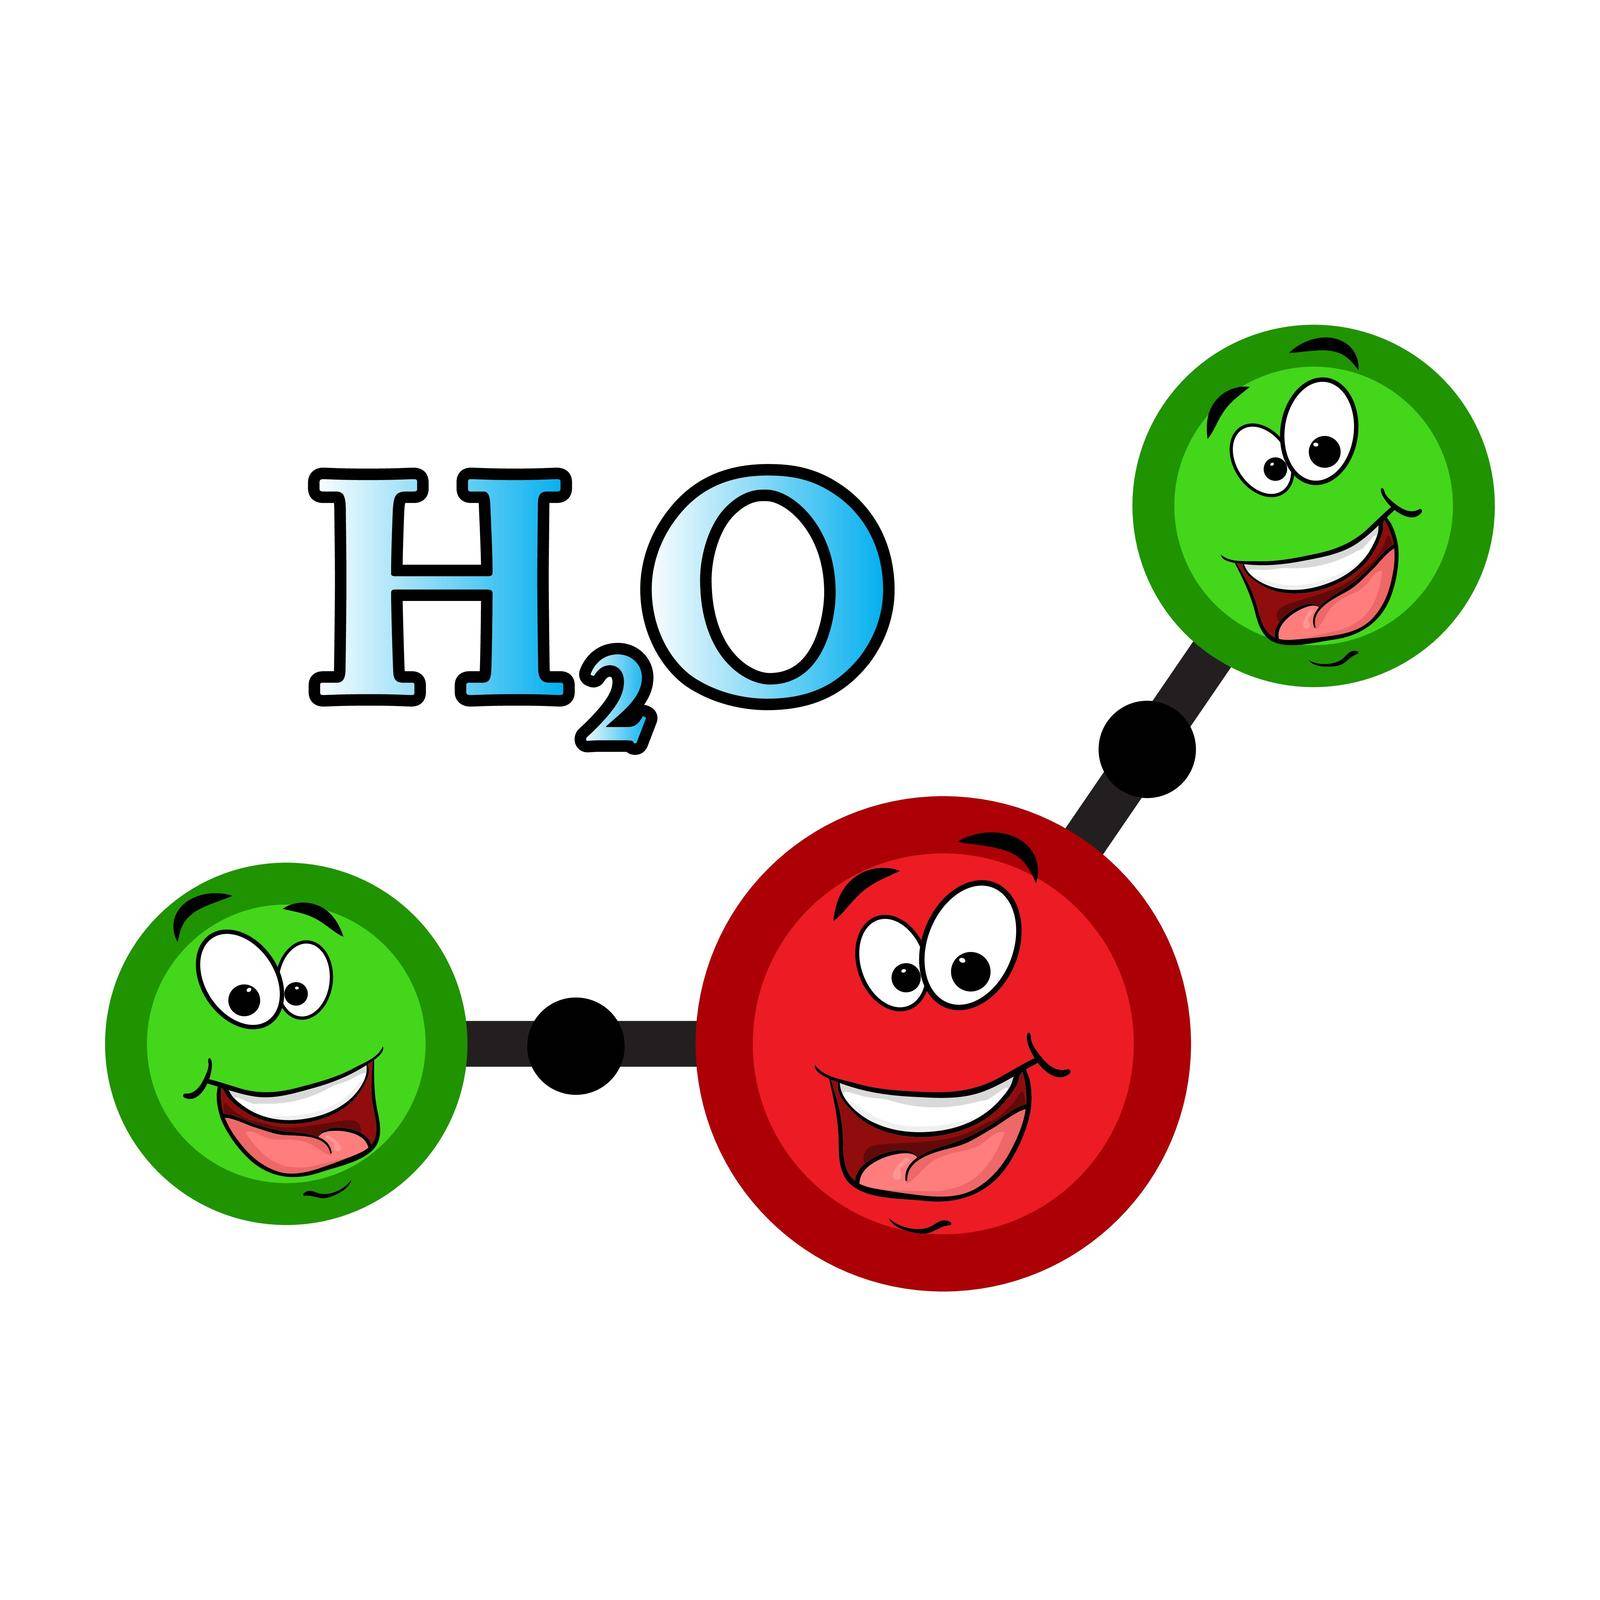 h2o character water molecule structure. Liquid aqua atom formula with eyes and smile. Vector illustration isolated on white background. by wektorygrafika